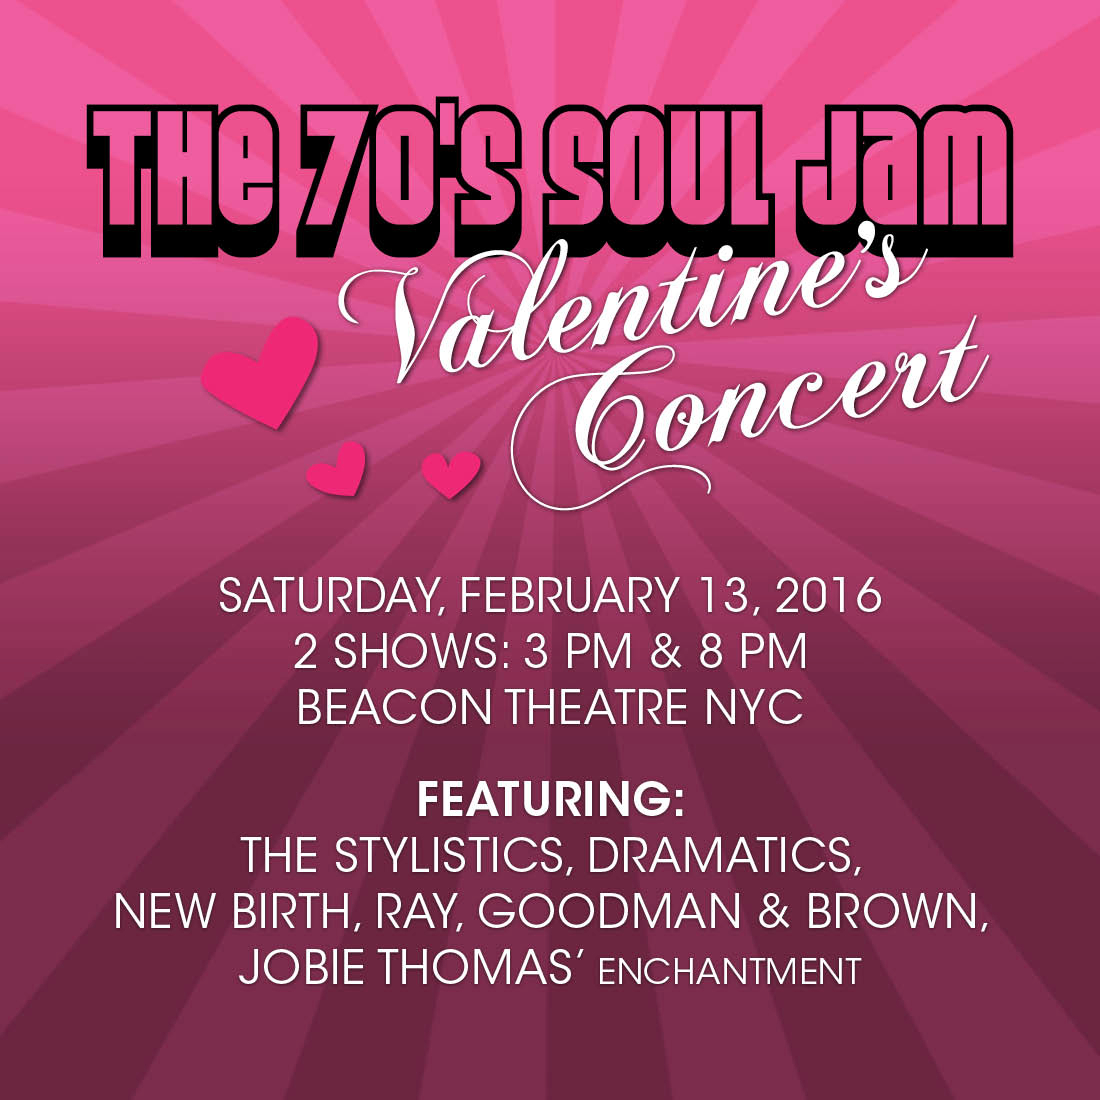 The annual 70's Soul Jam Valentine's Concert featuring 5 top classic soul/R&B acts returns to the Beacon Theatre, Saturday, February 13, shows at 3pm & 8pm.